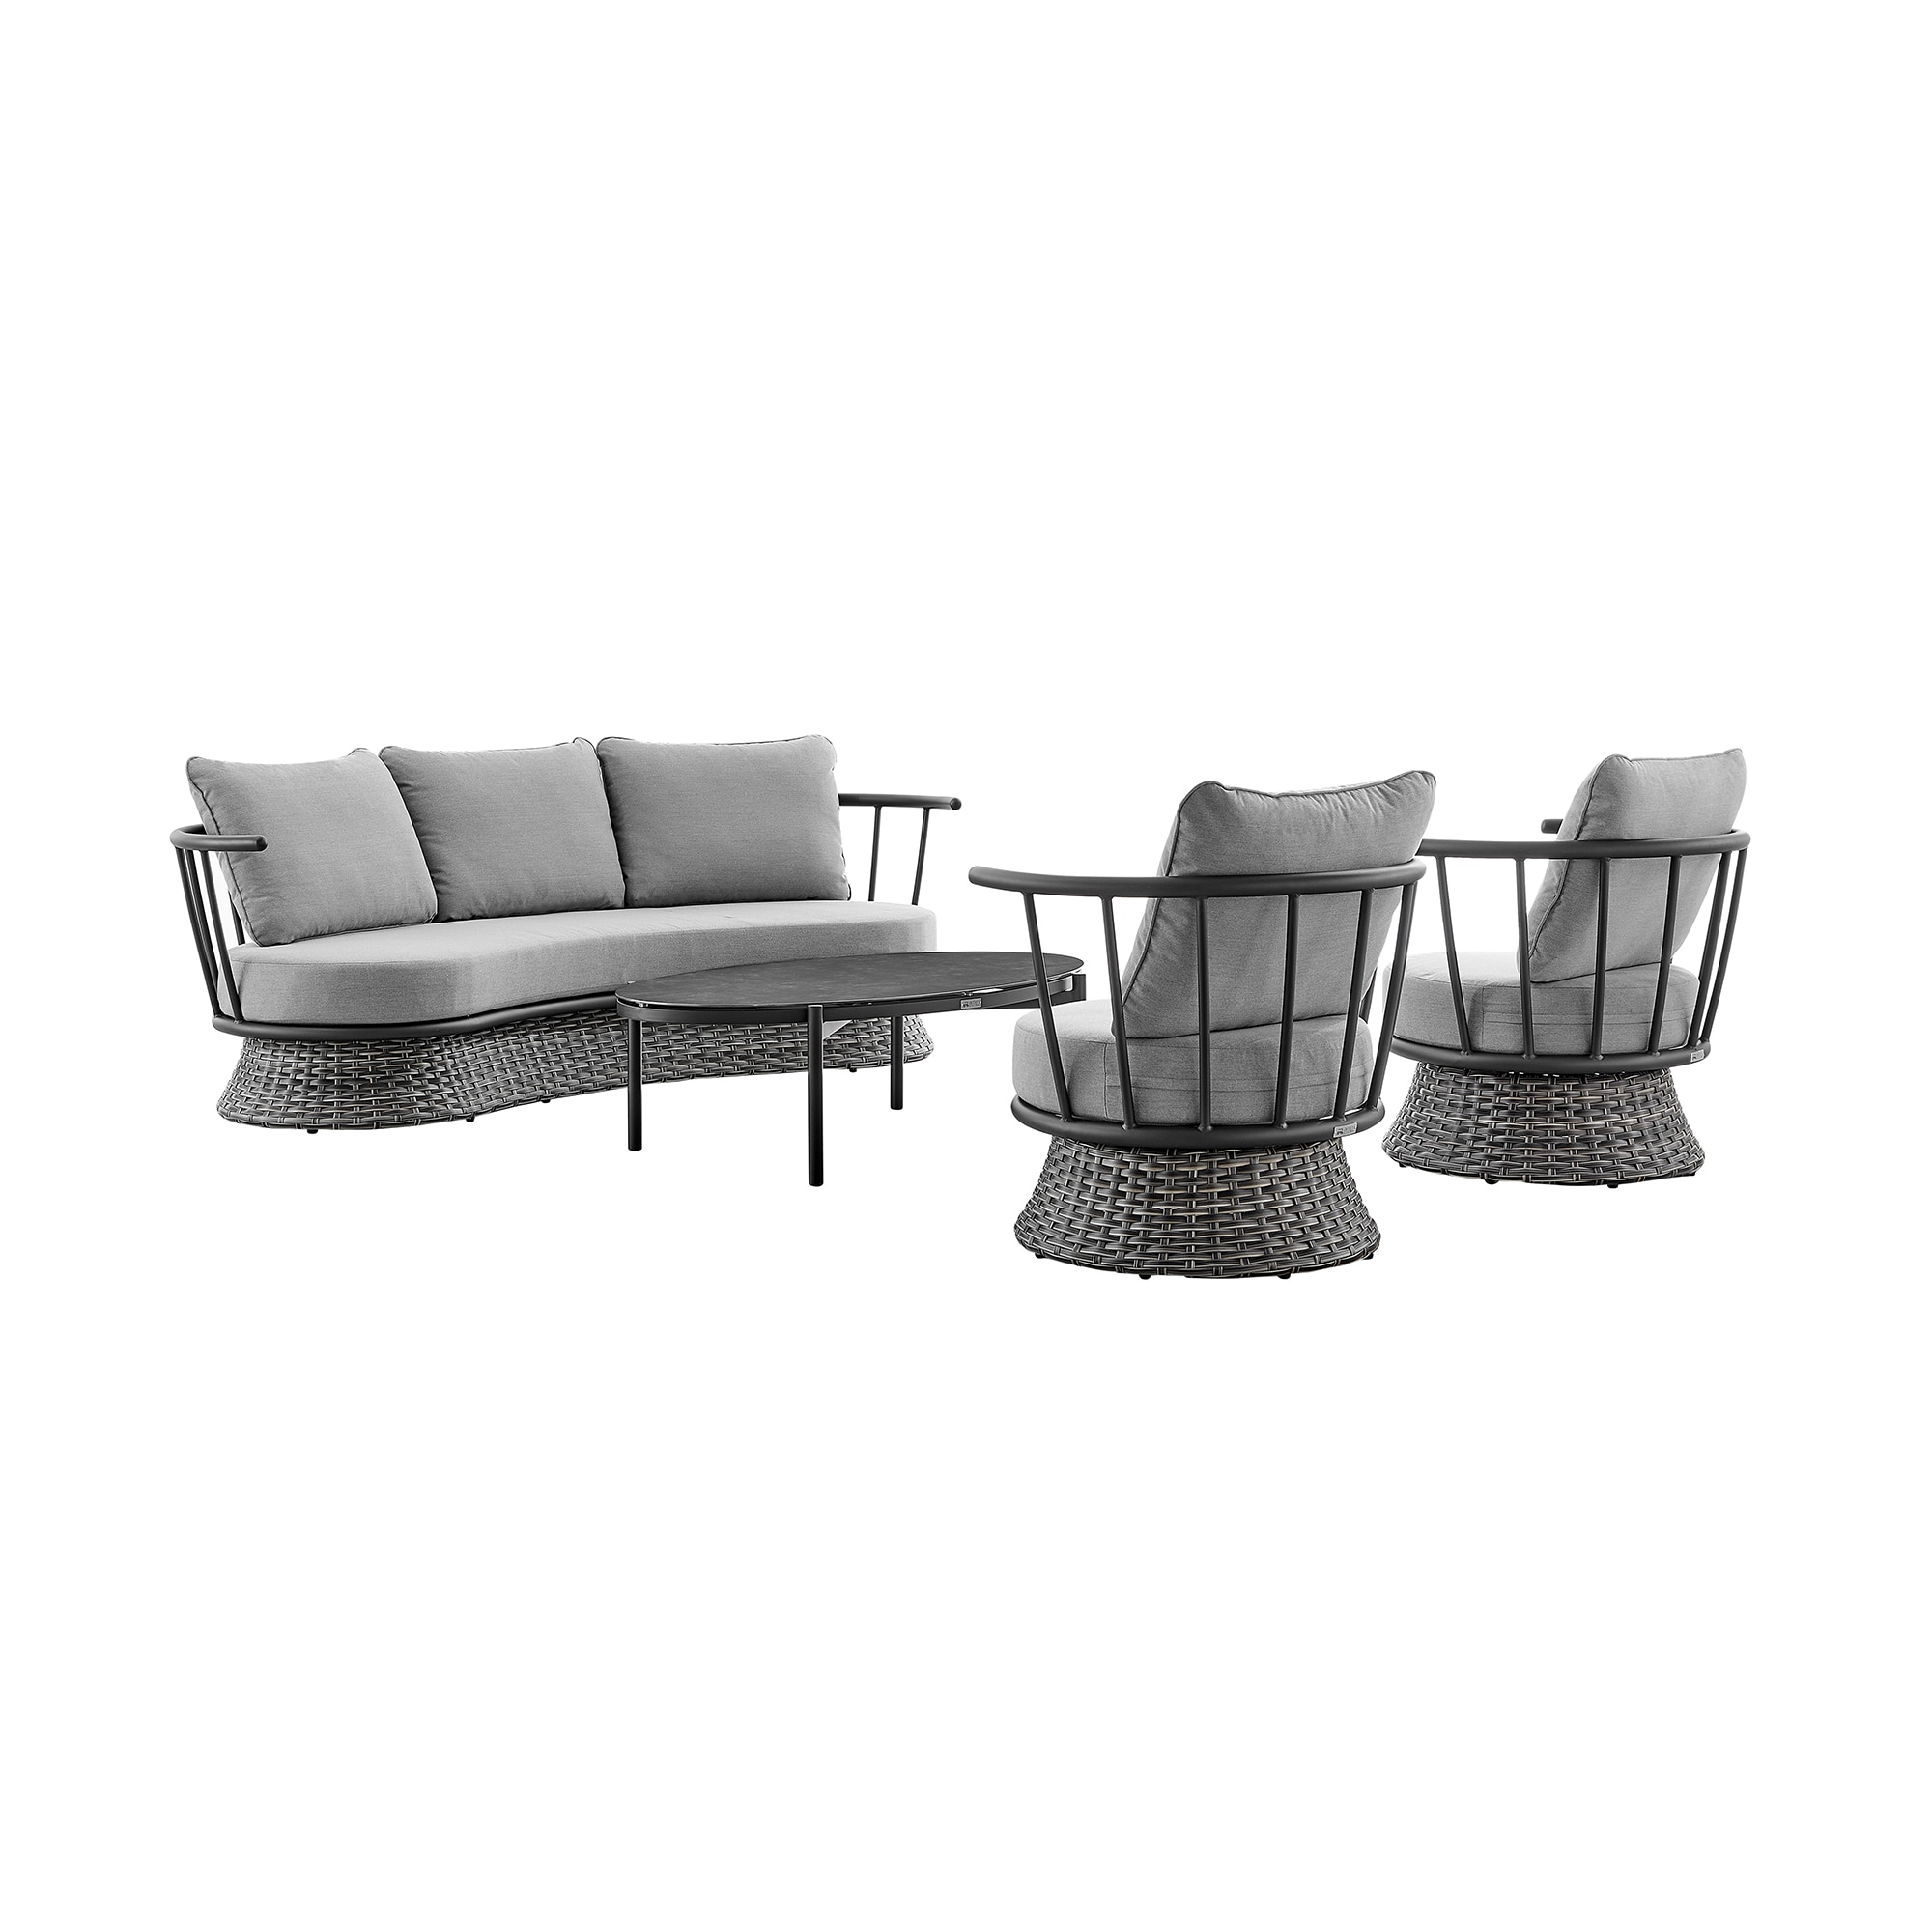 Monk 4 Piece Outdoor Patio Furniture Set in Black Aluminum and Gray Wicker with Gray Cushions